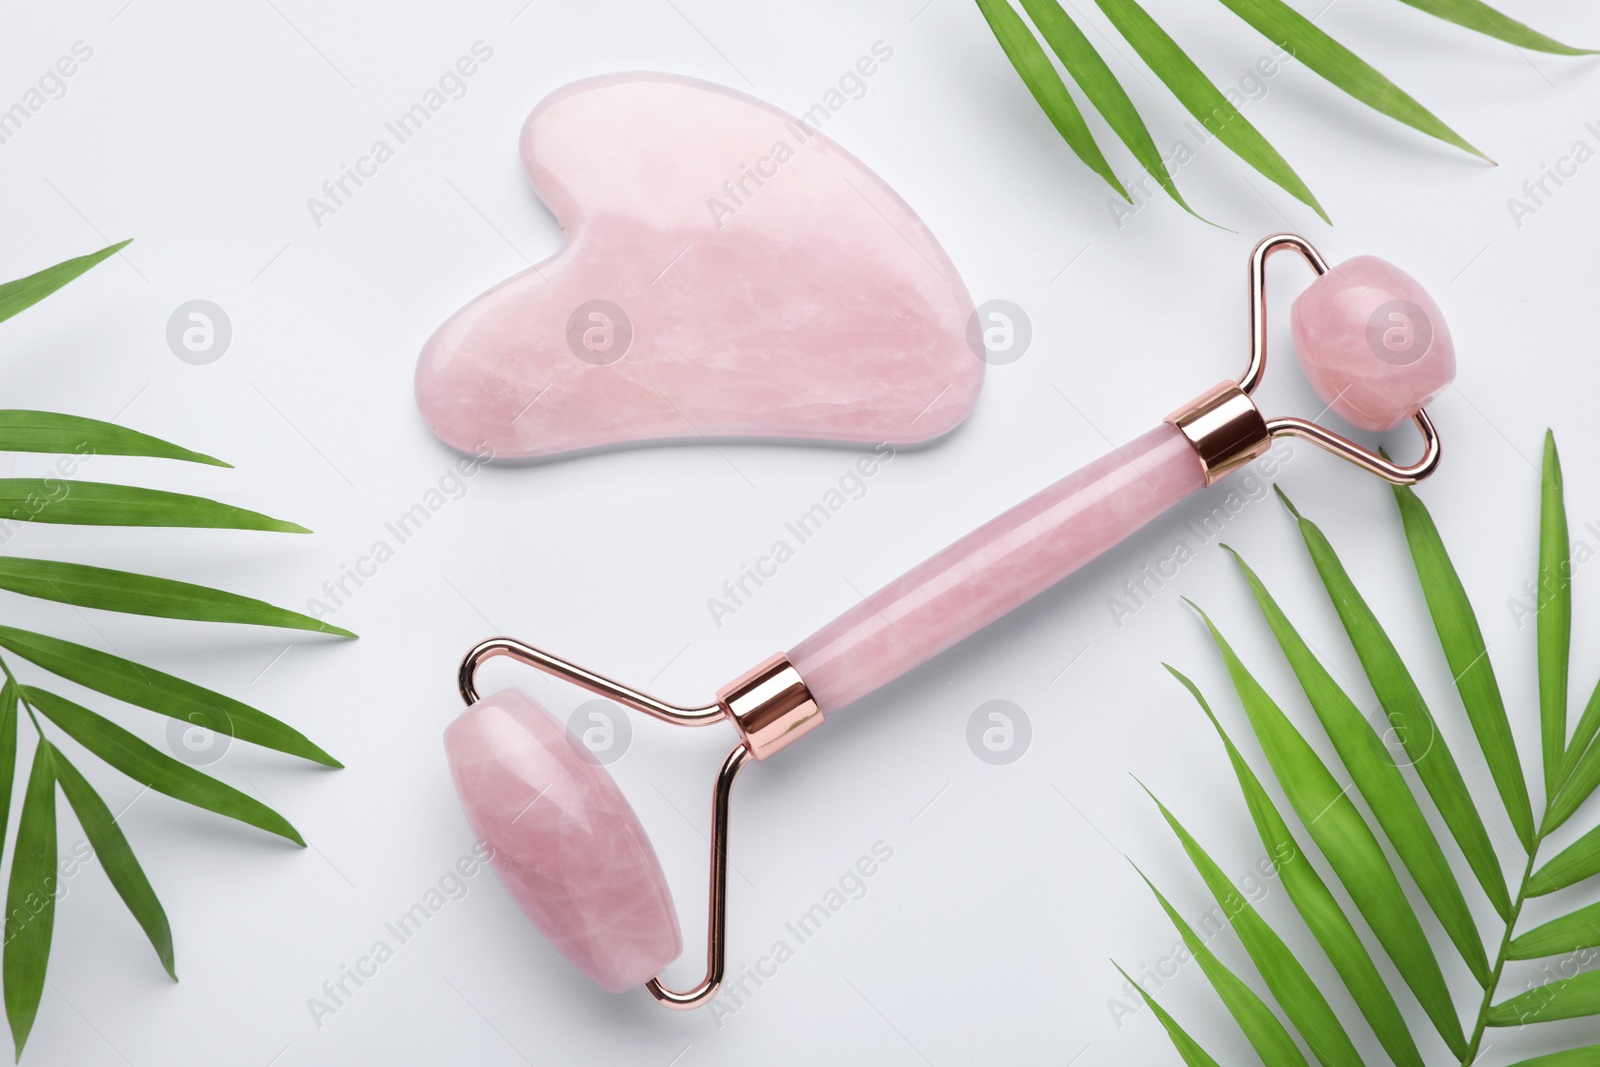 Photo of Gua sha stone, face roller and green leaves on white background, flat lay